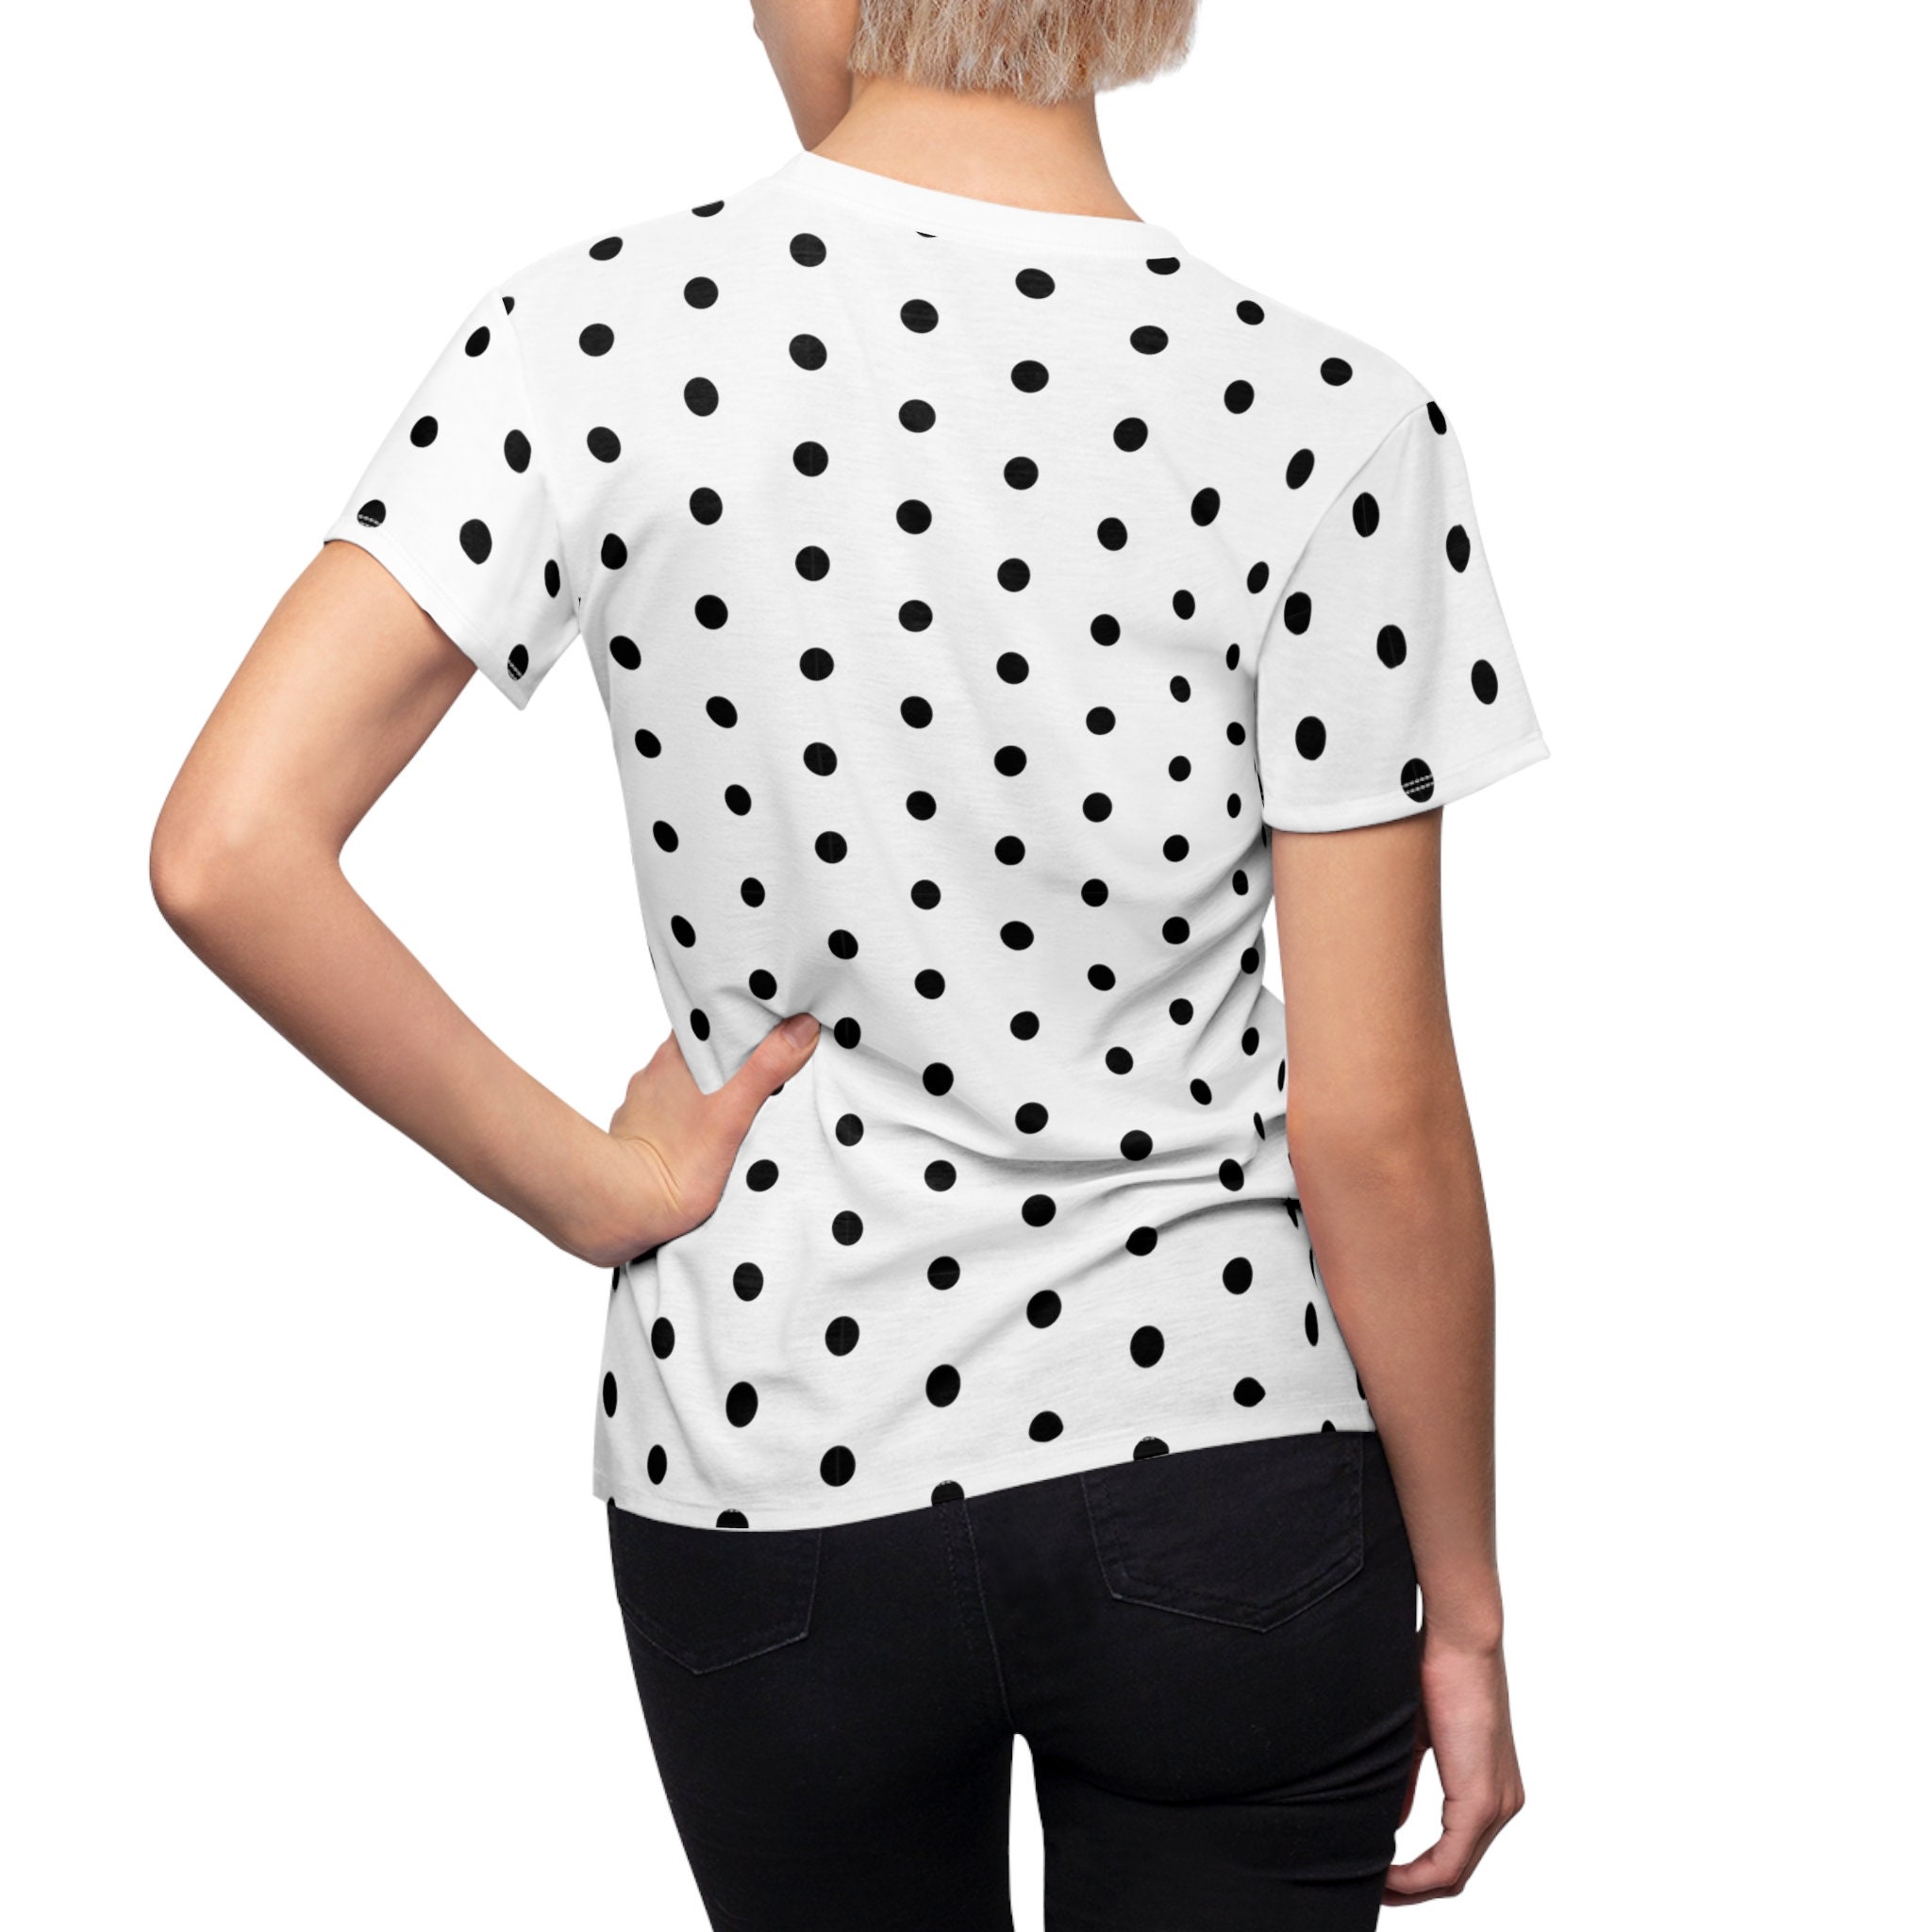 «Black on White Polka Dot Pattern» Women's All Over T-Shirt by Looly  Elzayat | Curioos